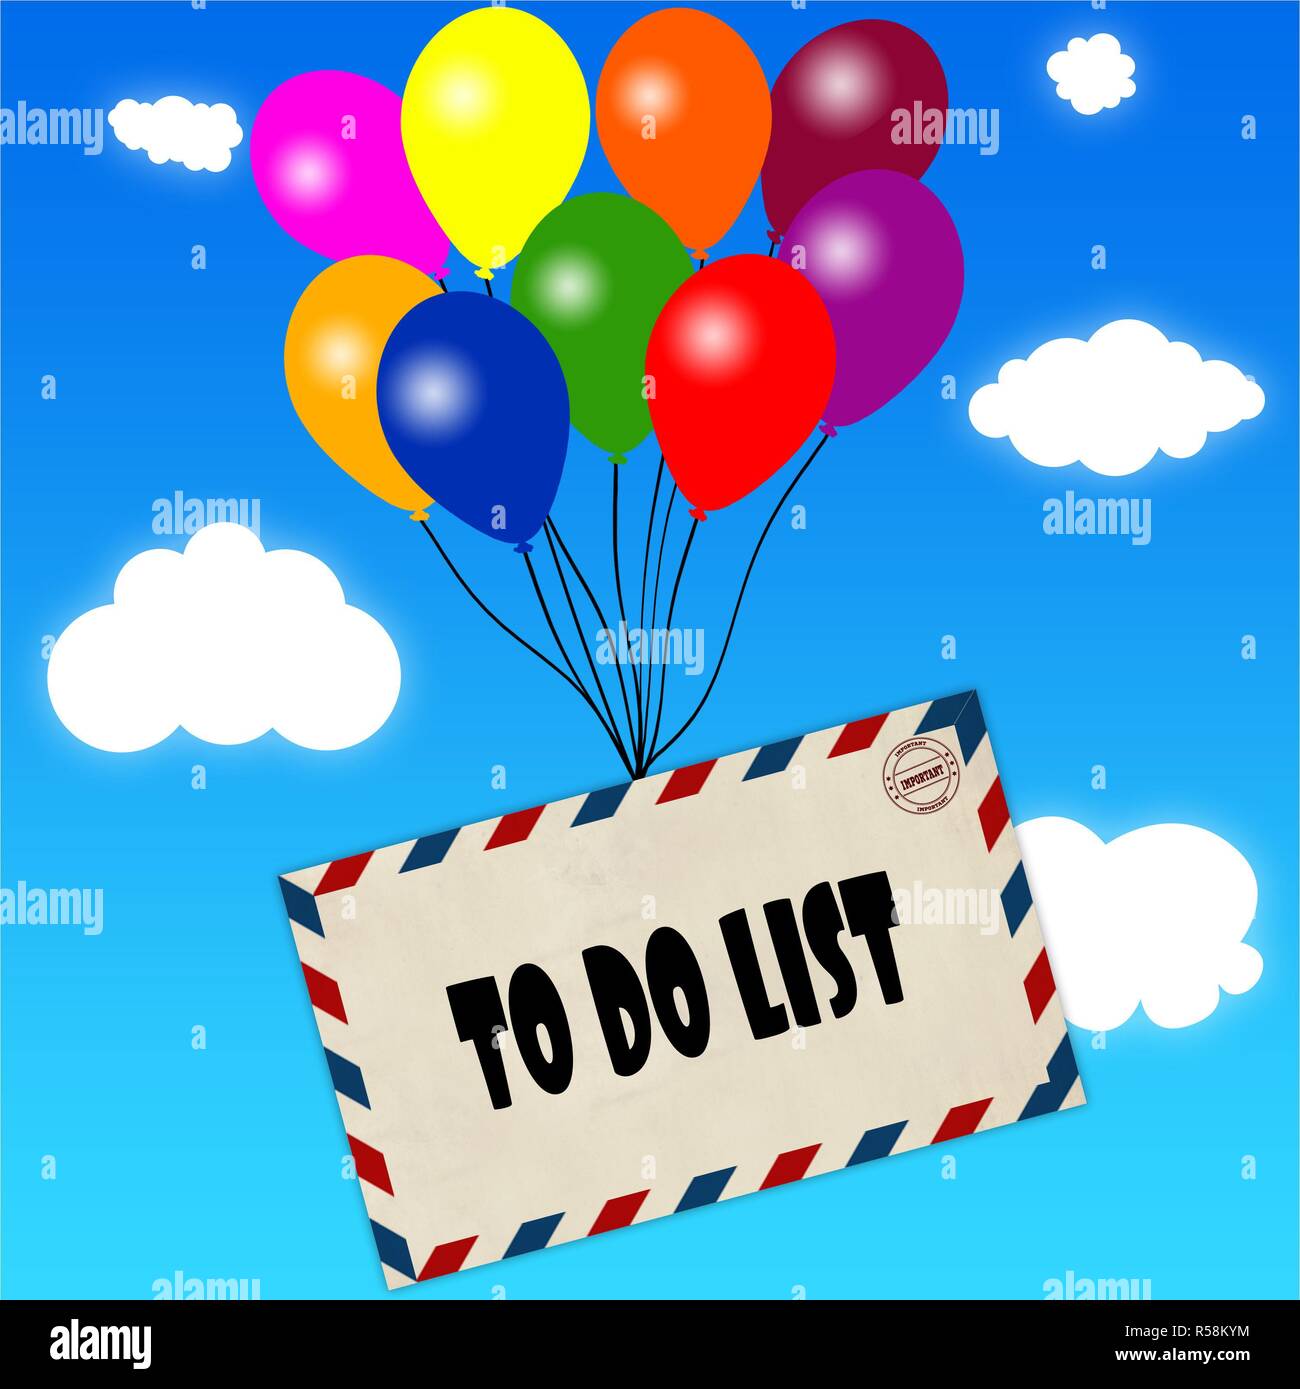 Envelope with TO DO LIST message attached to multicoloured balloons on blue sky and clouds background. Stock Photo